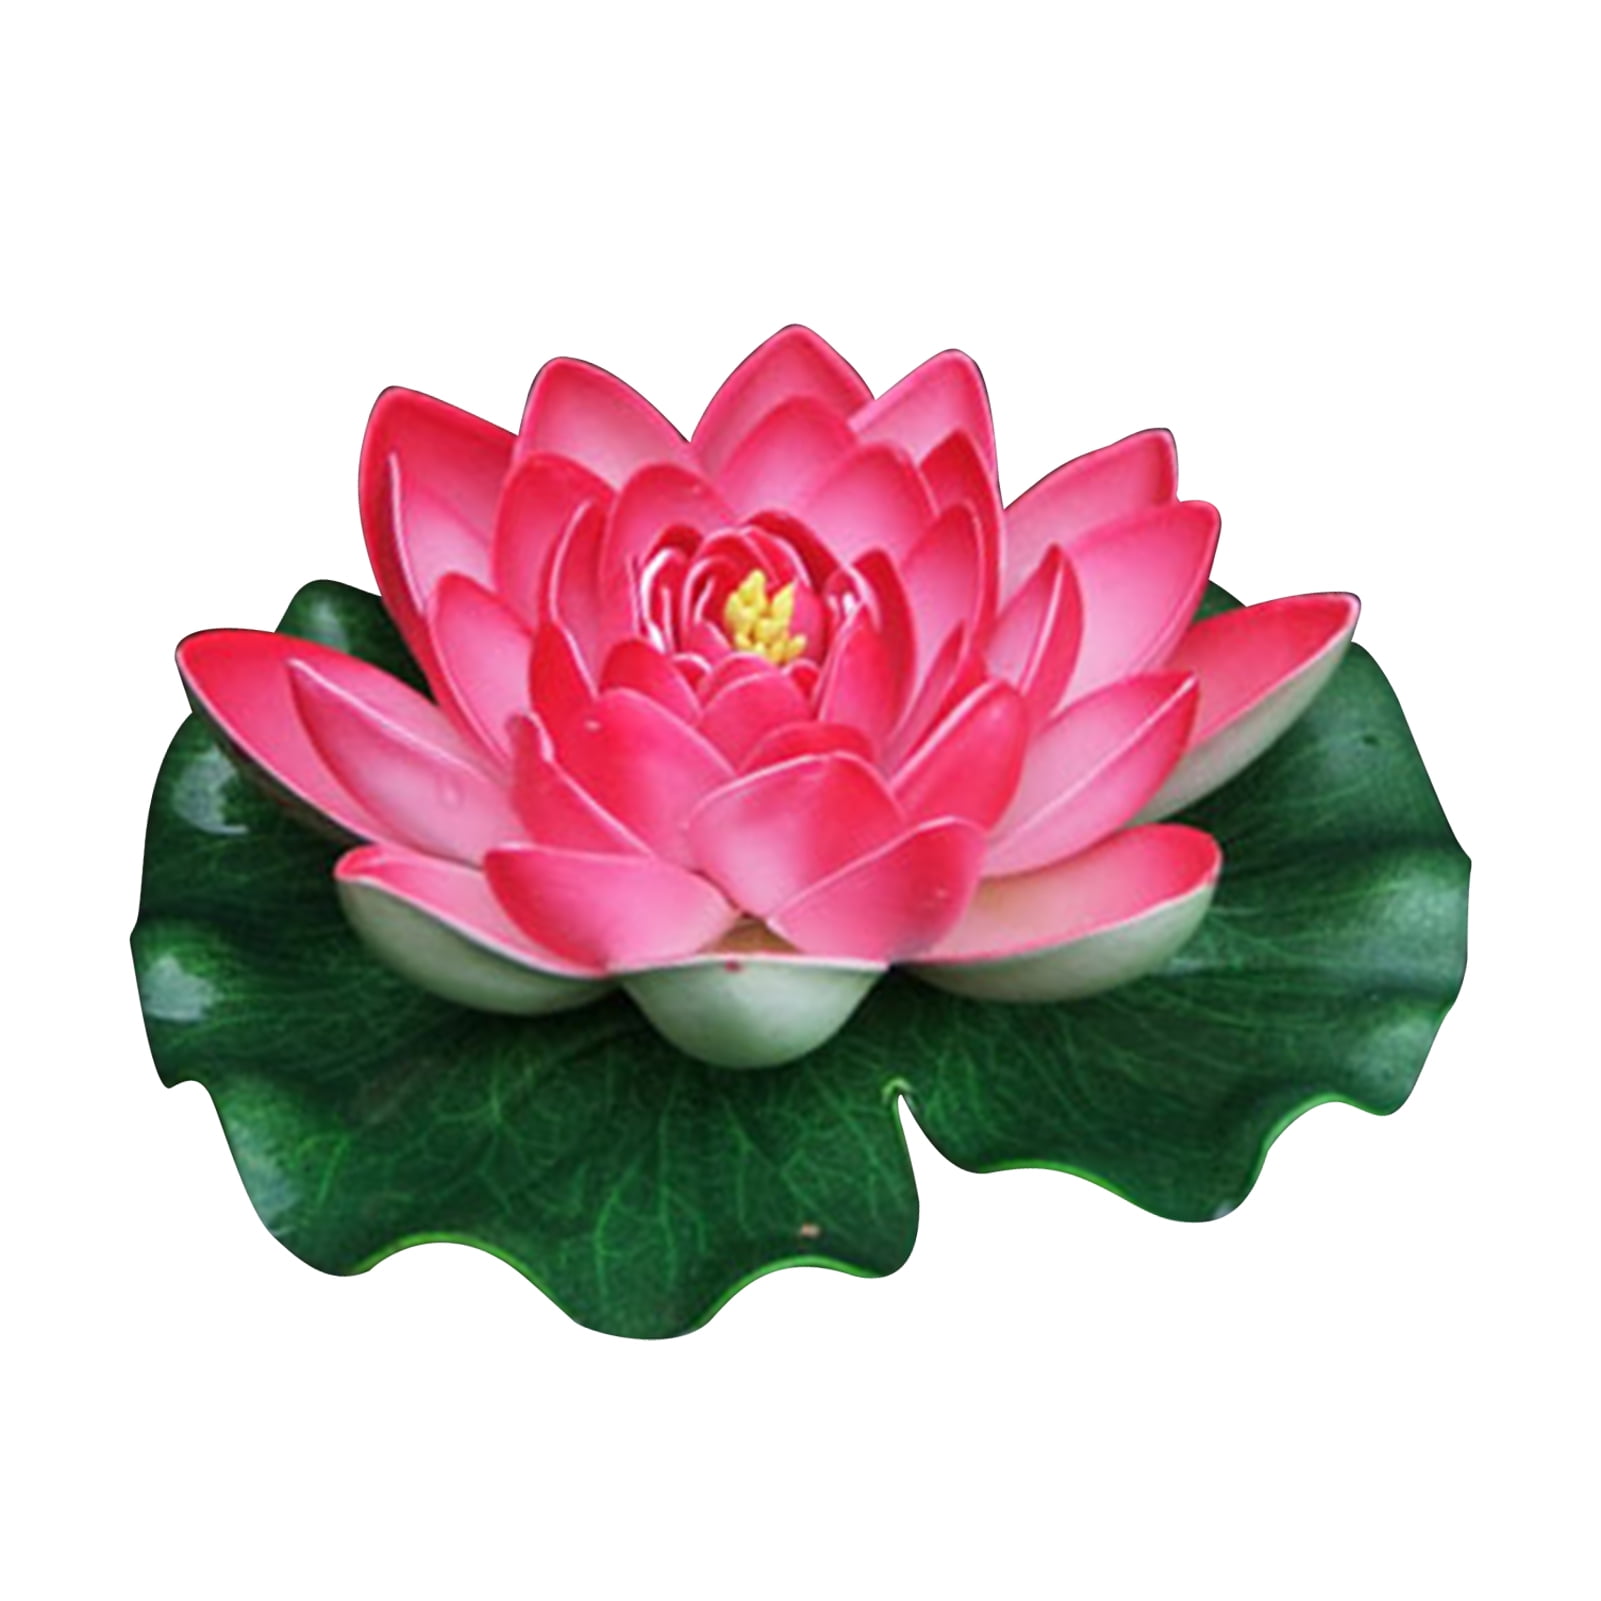 Floating Pond Decor Water Lily Lotus Foam Flower Small Set of 4 